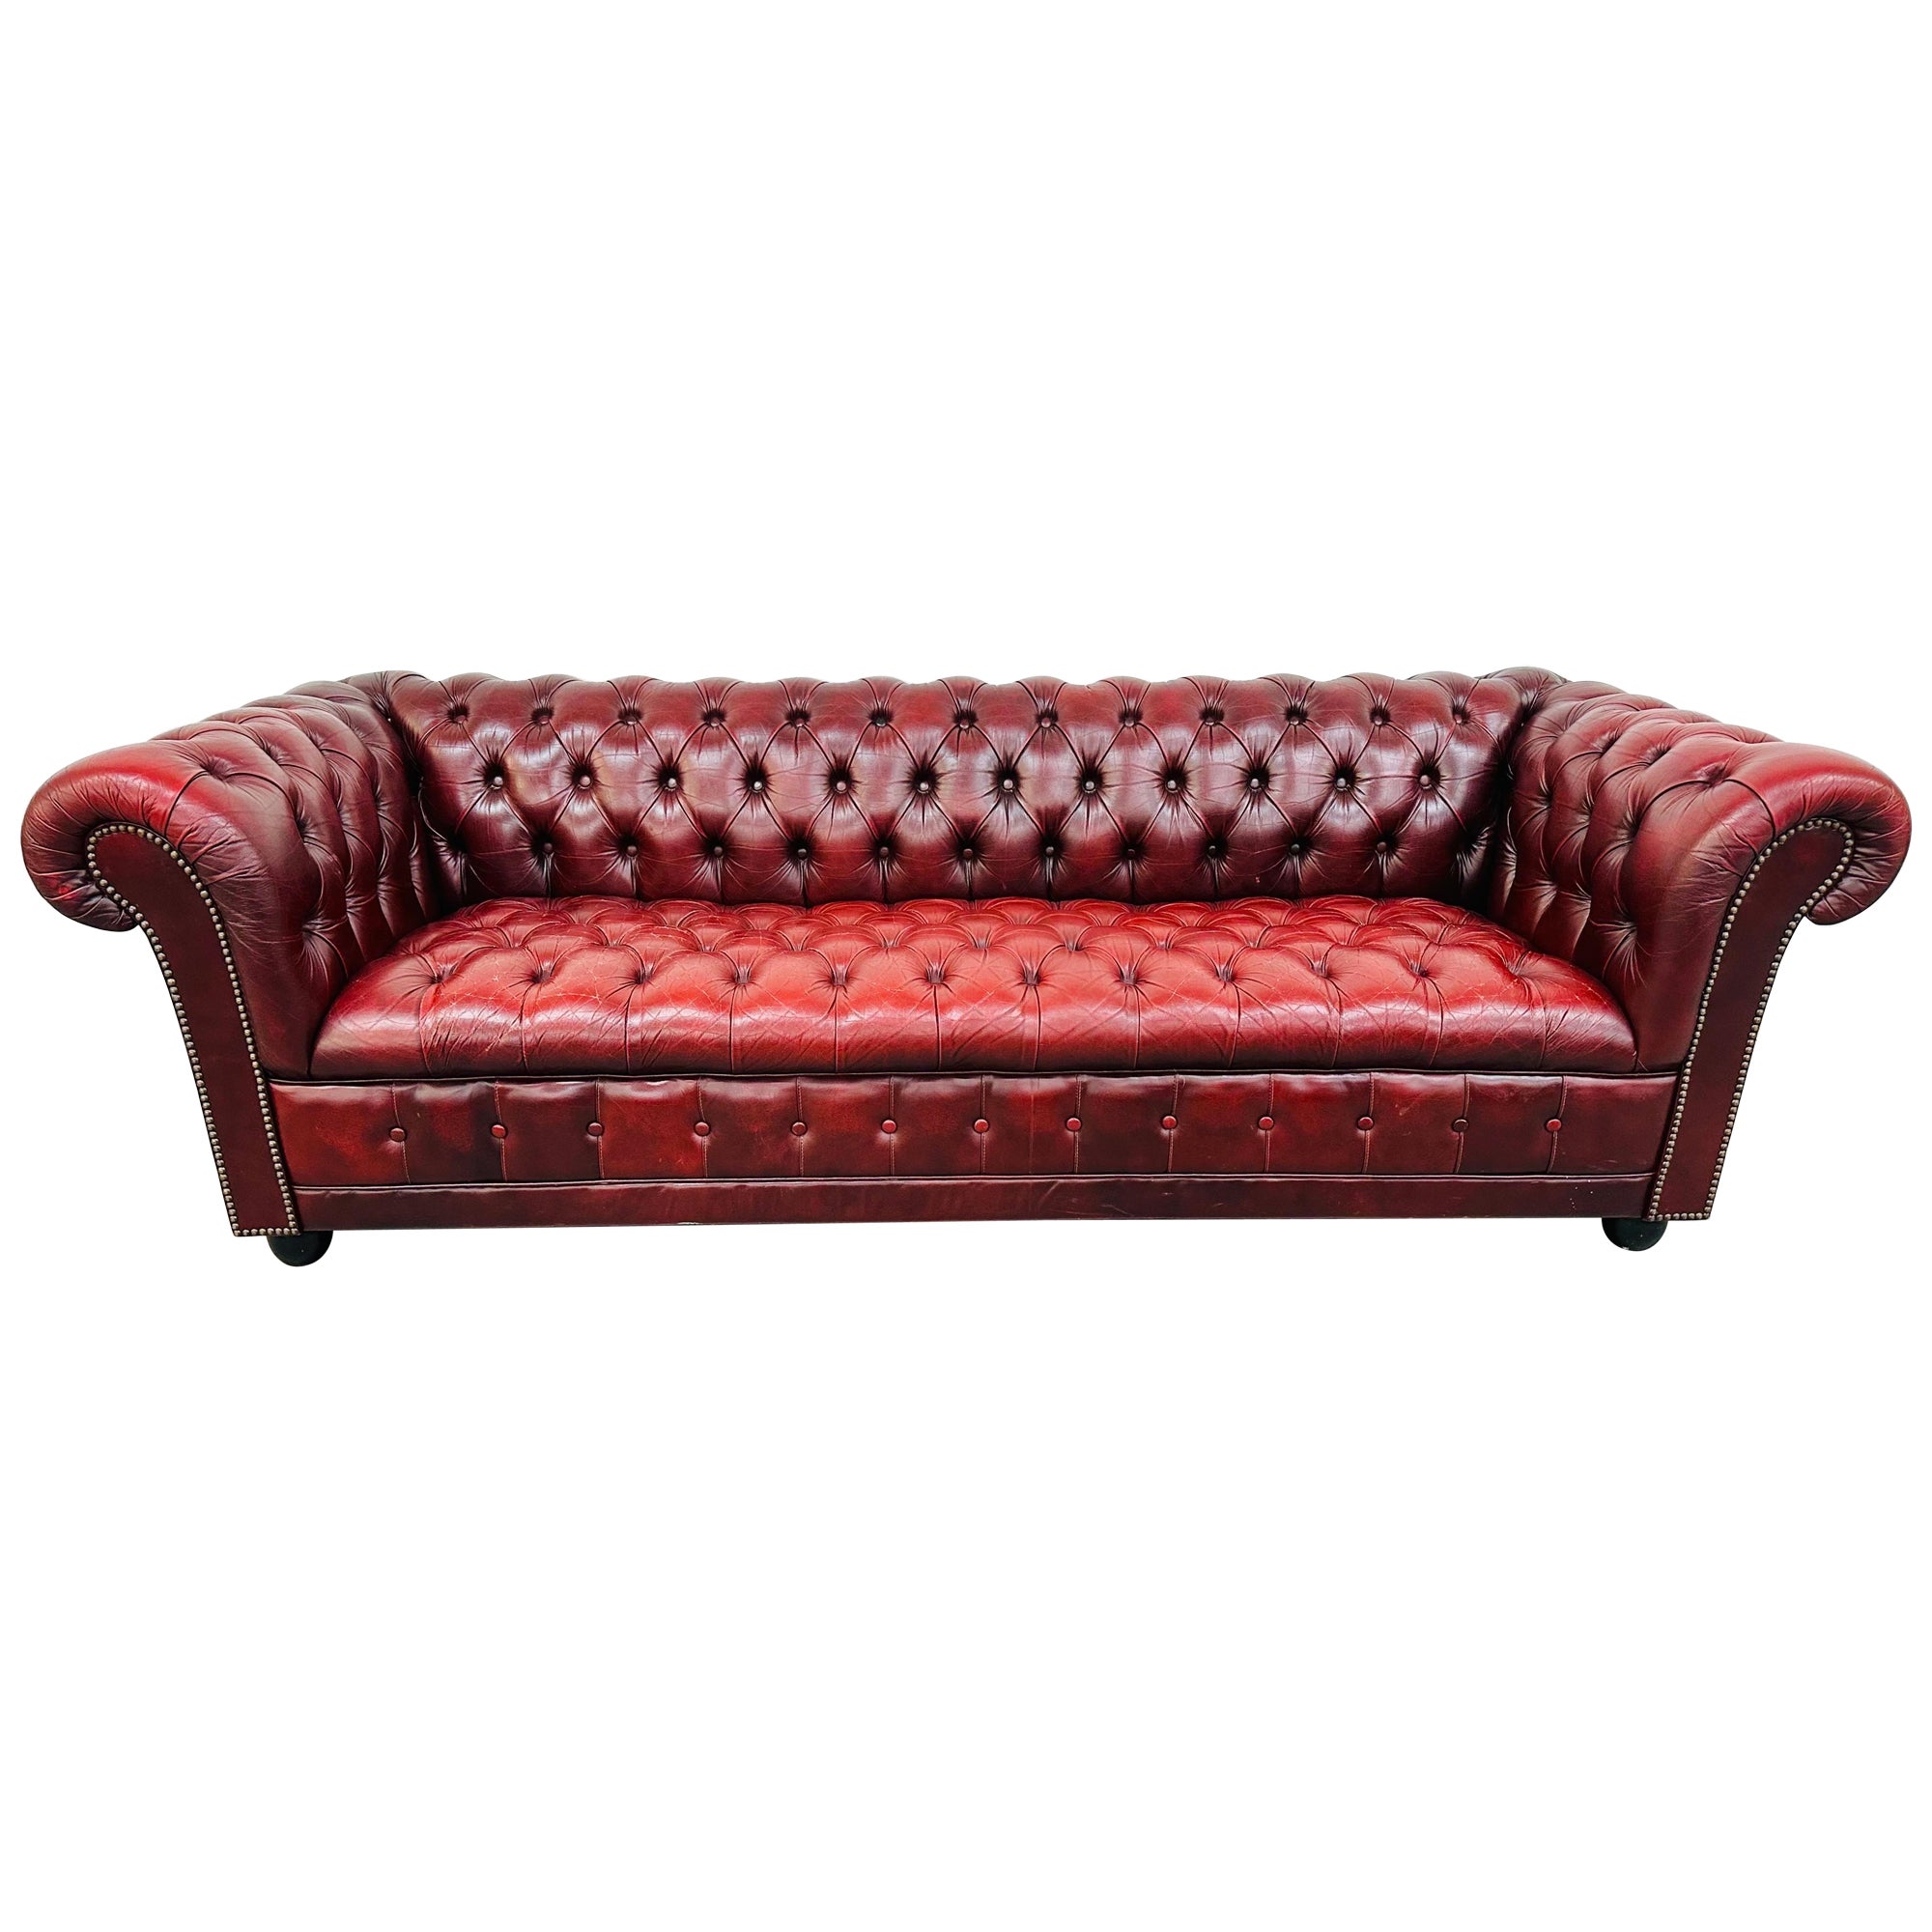 Modern Red Chesterfield Sofa